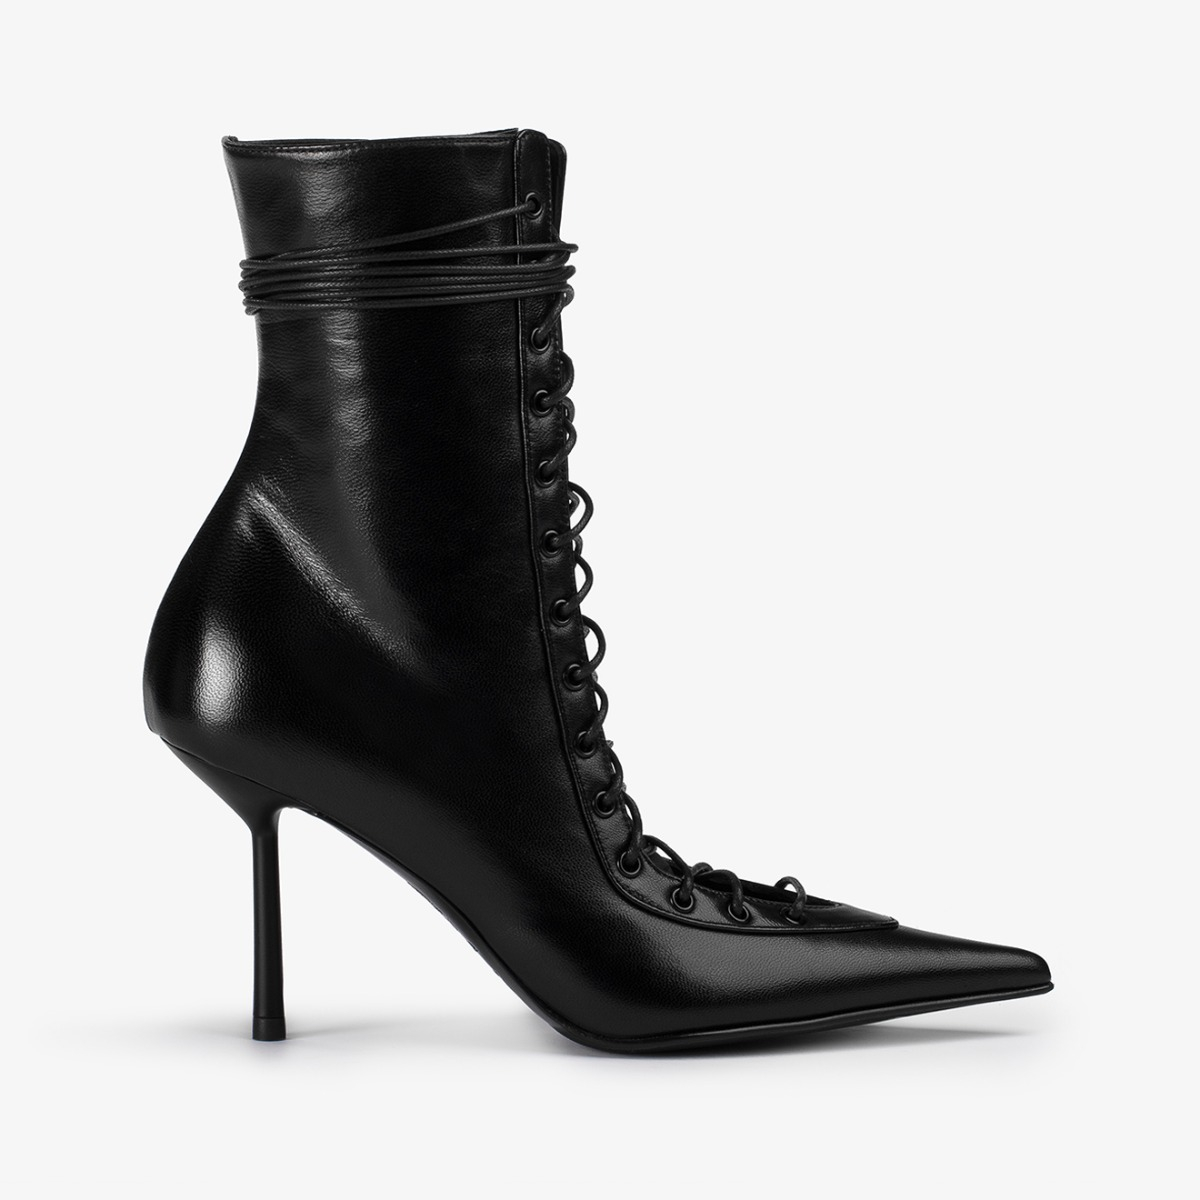 COLETTE ANKLE BOOT 80 mm - Le Silla | Official Online Store